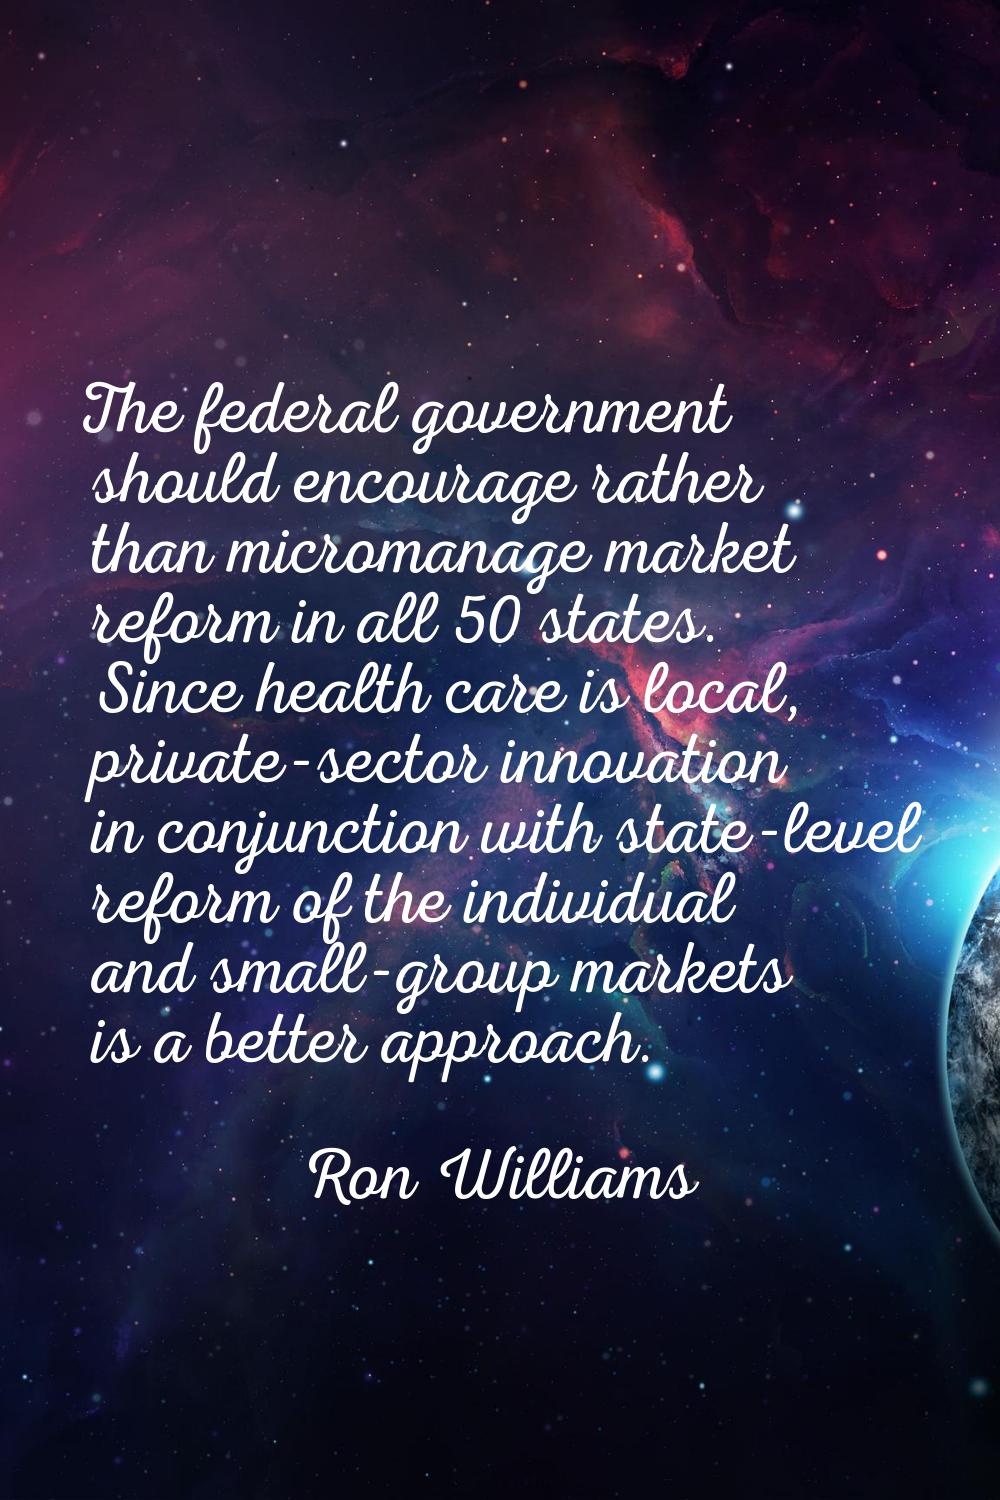 The federal government should encourage rather than micromanage market reform in all 50 states. Sin